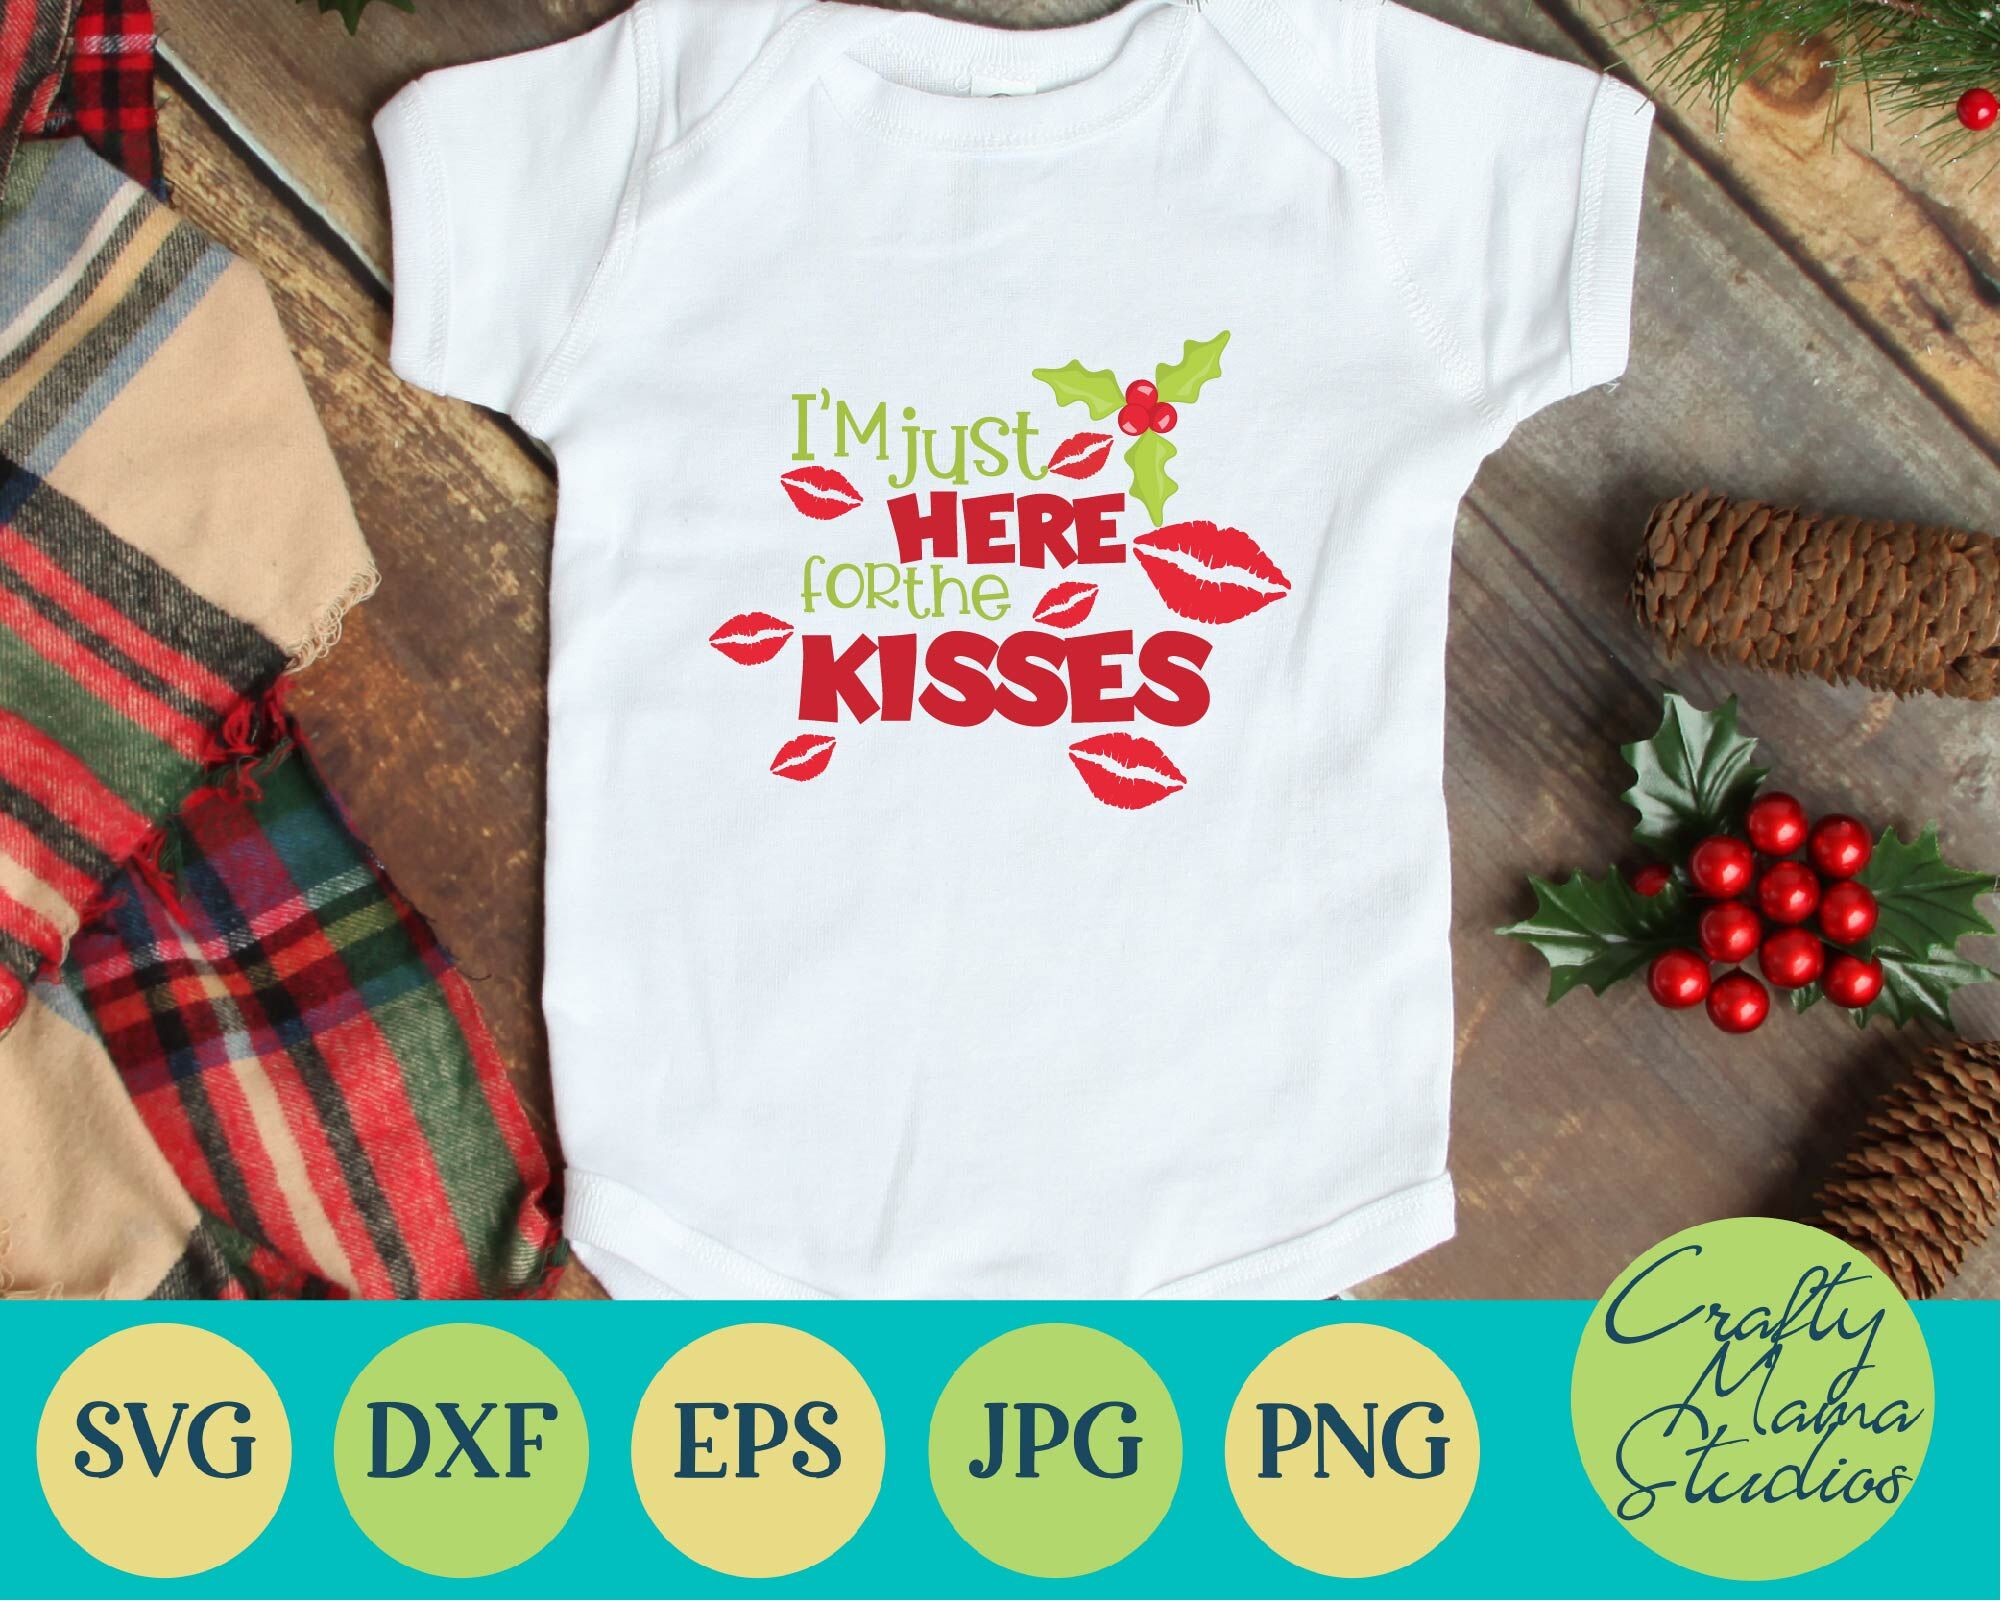 Christmas Svg Holiday Svg My First Christmas I M Just Here For T By Crafty Mama Studios Thehungryjpeg Com